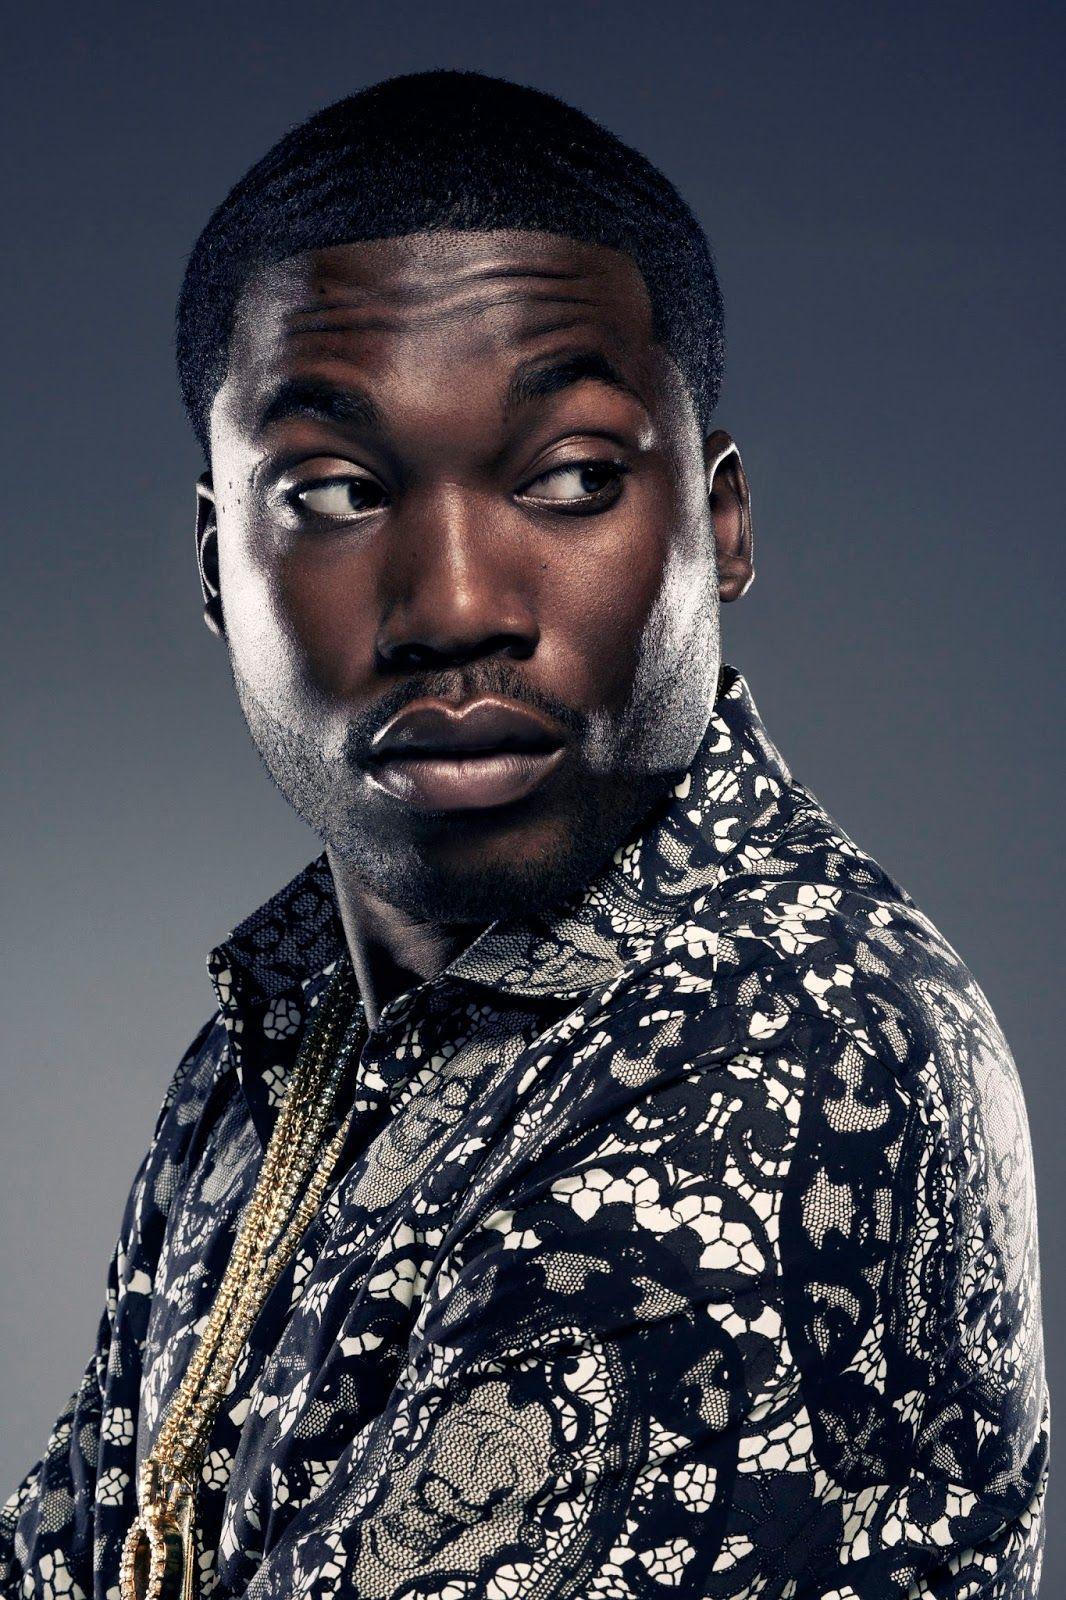 Meek Mill Says He Gets Motivation From Listening To Drake's “Back